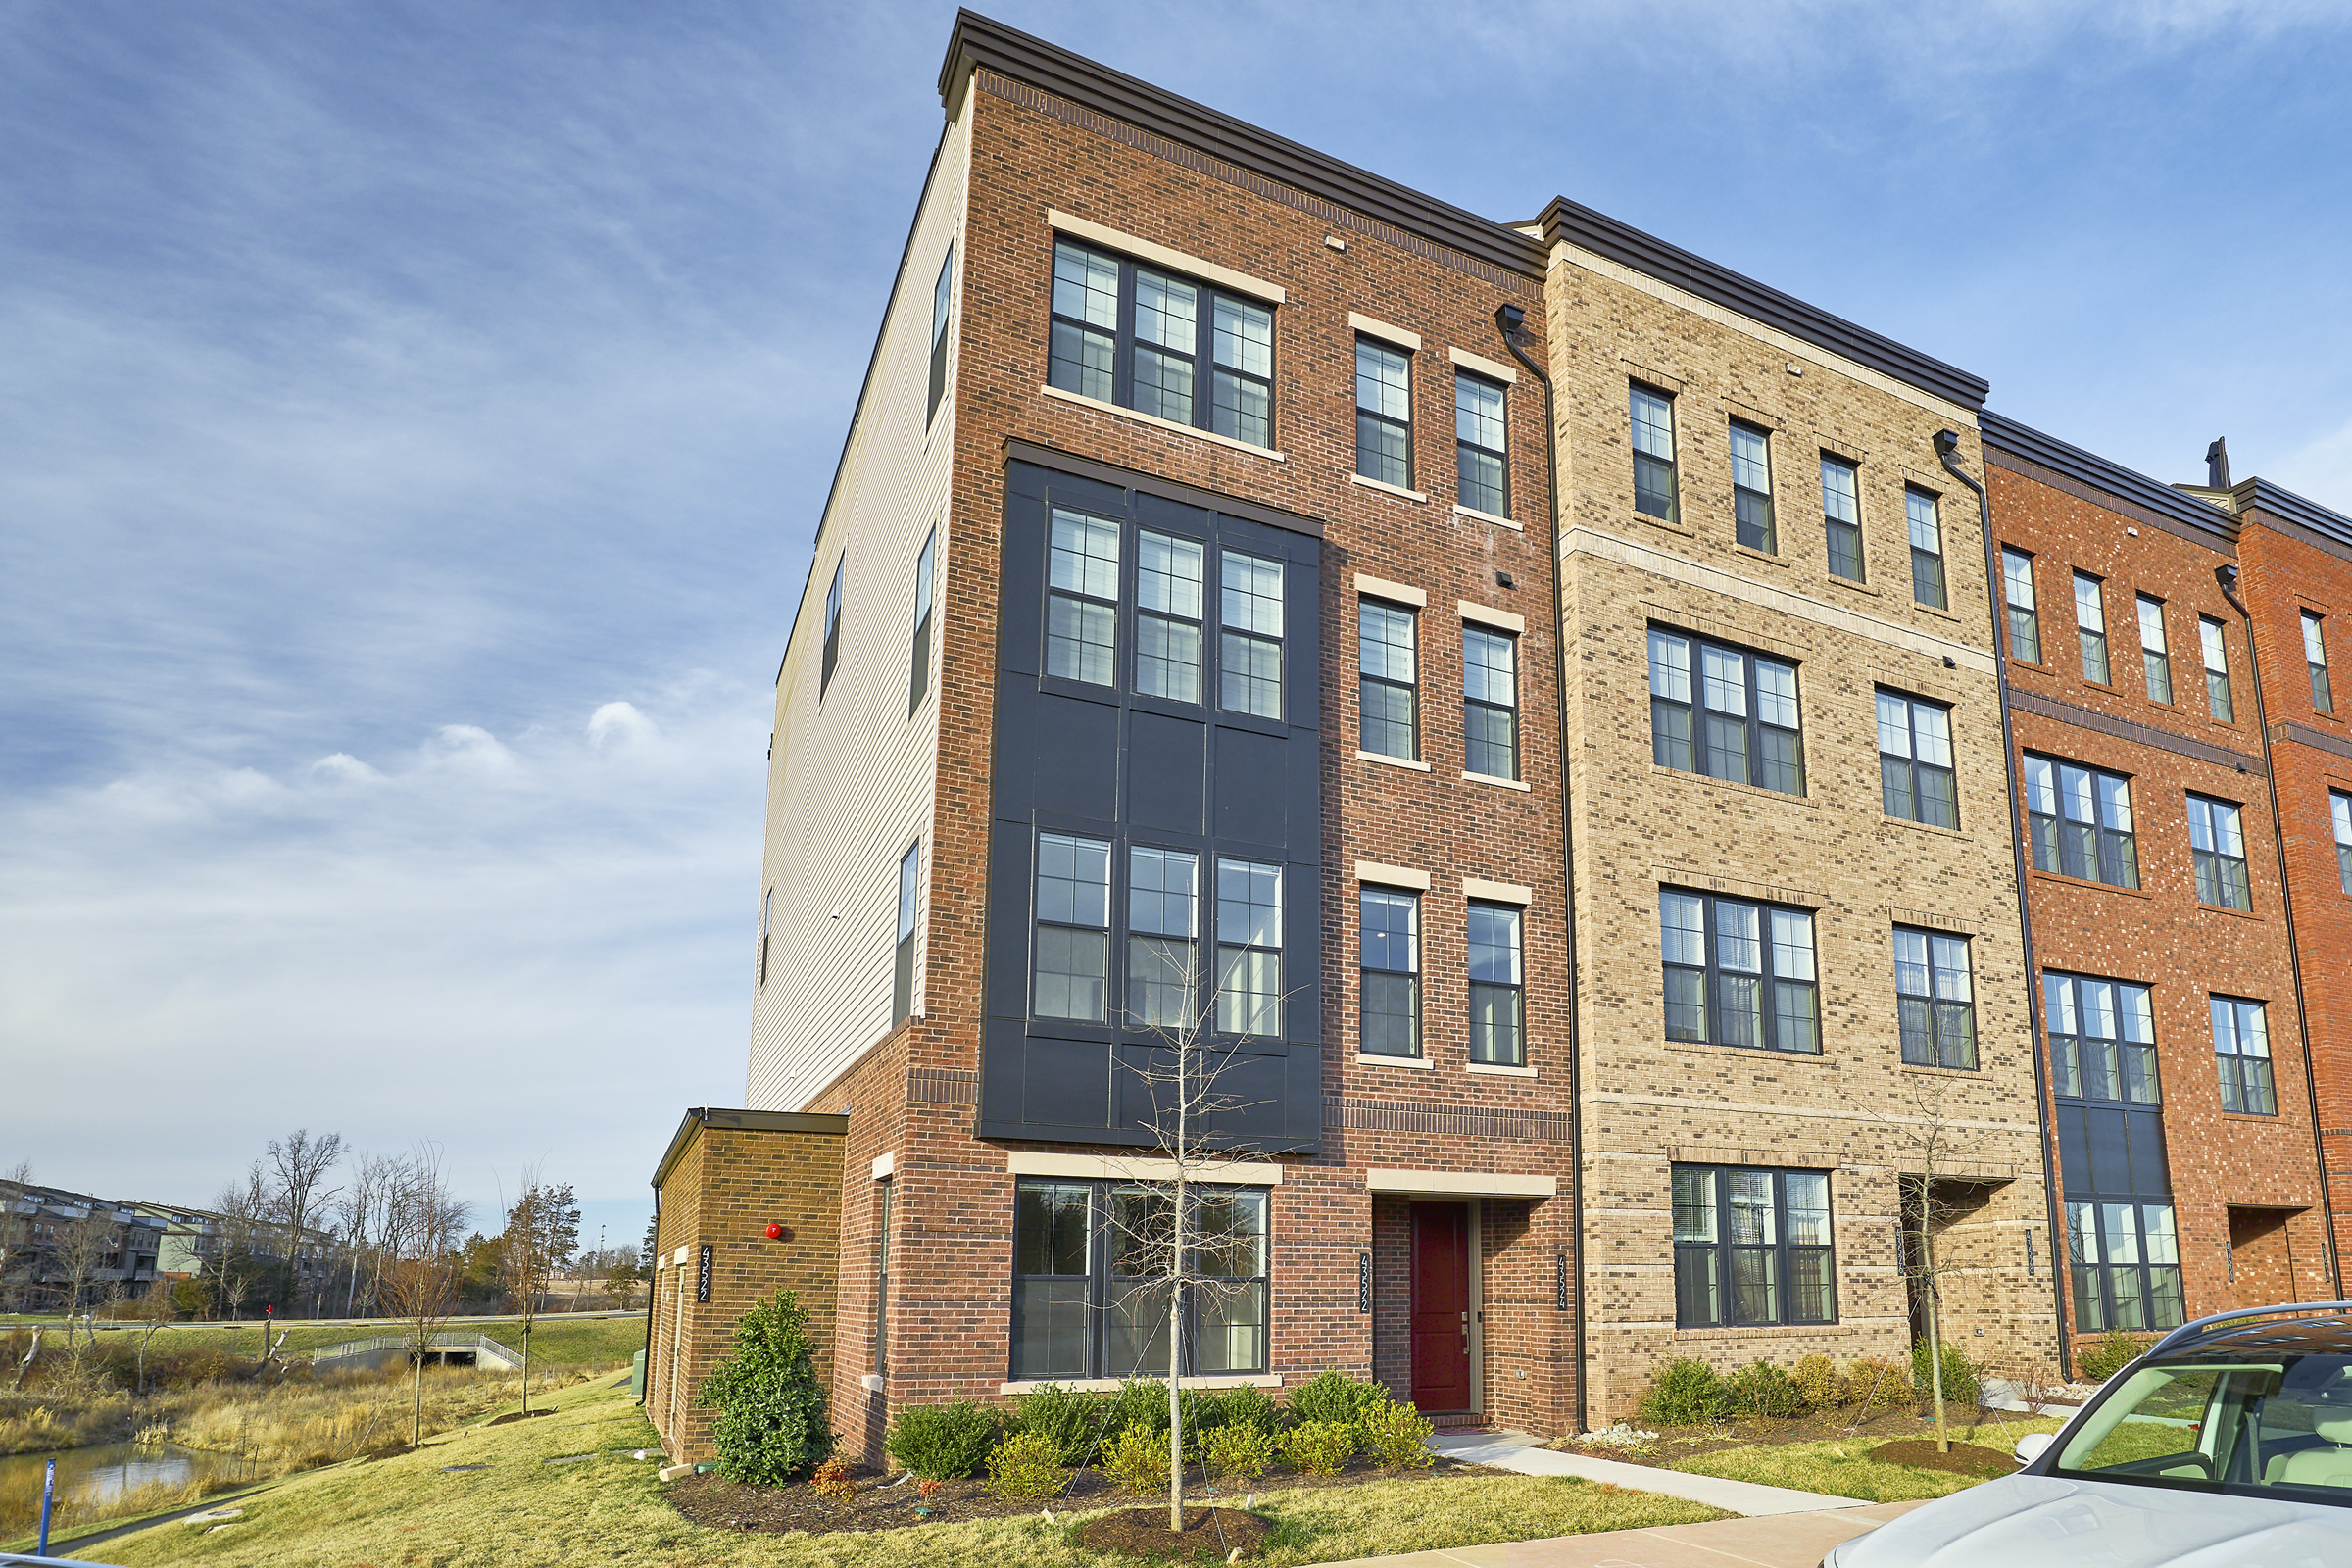 Exterior professional photo of 43522 Centergate Drive - showing the front from the left angle, brick front facade with 4 floors and lots of windows